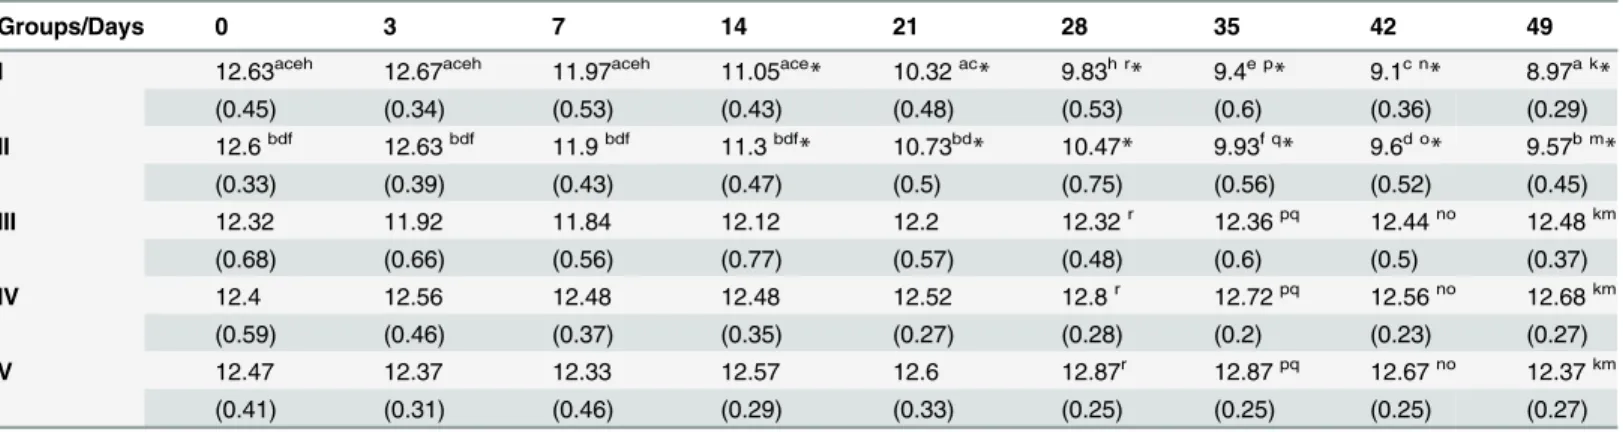 Table 2. Effects of CpG ODN inoculation and/ or Trypanosoma evansi infection on mean haemoglobin values (g/dl) in different groups of rabbits.